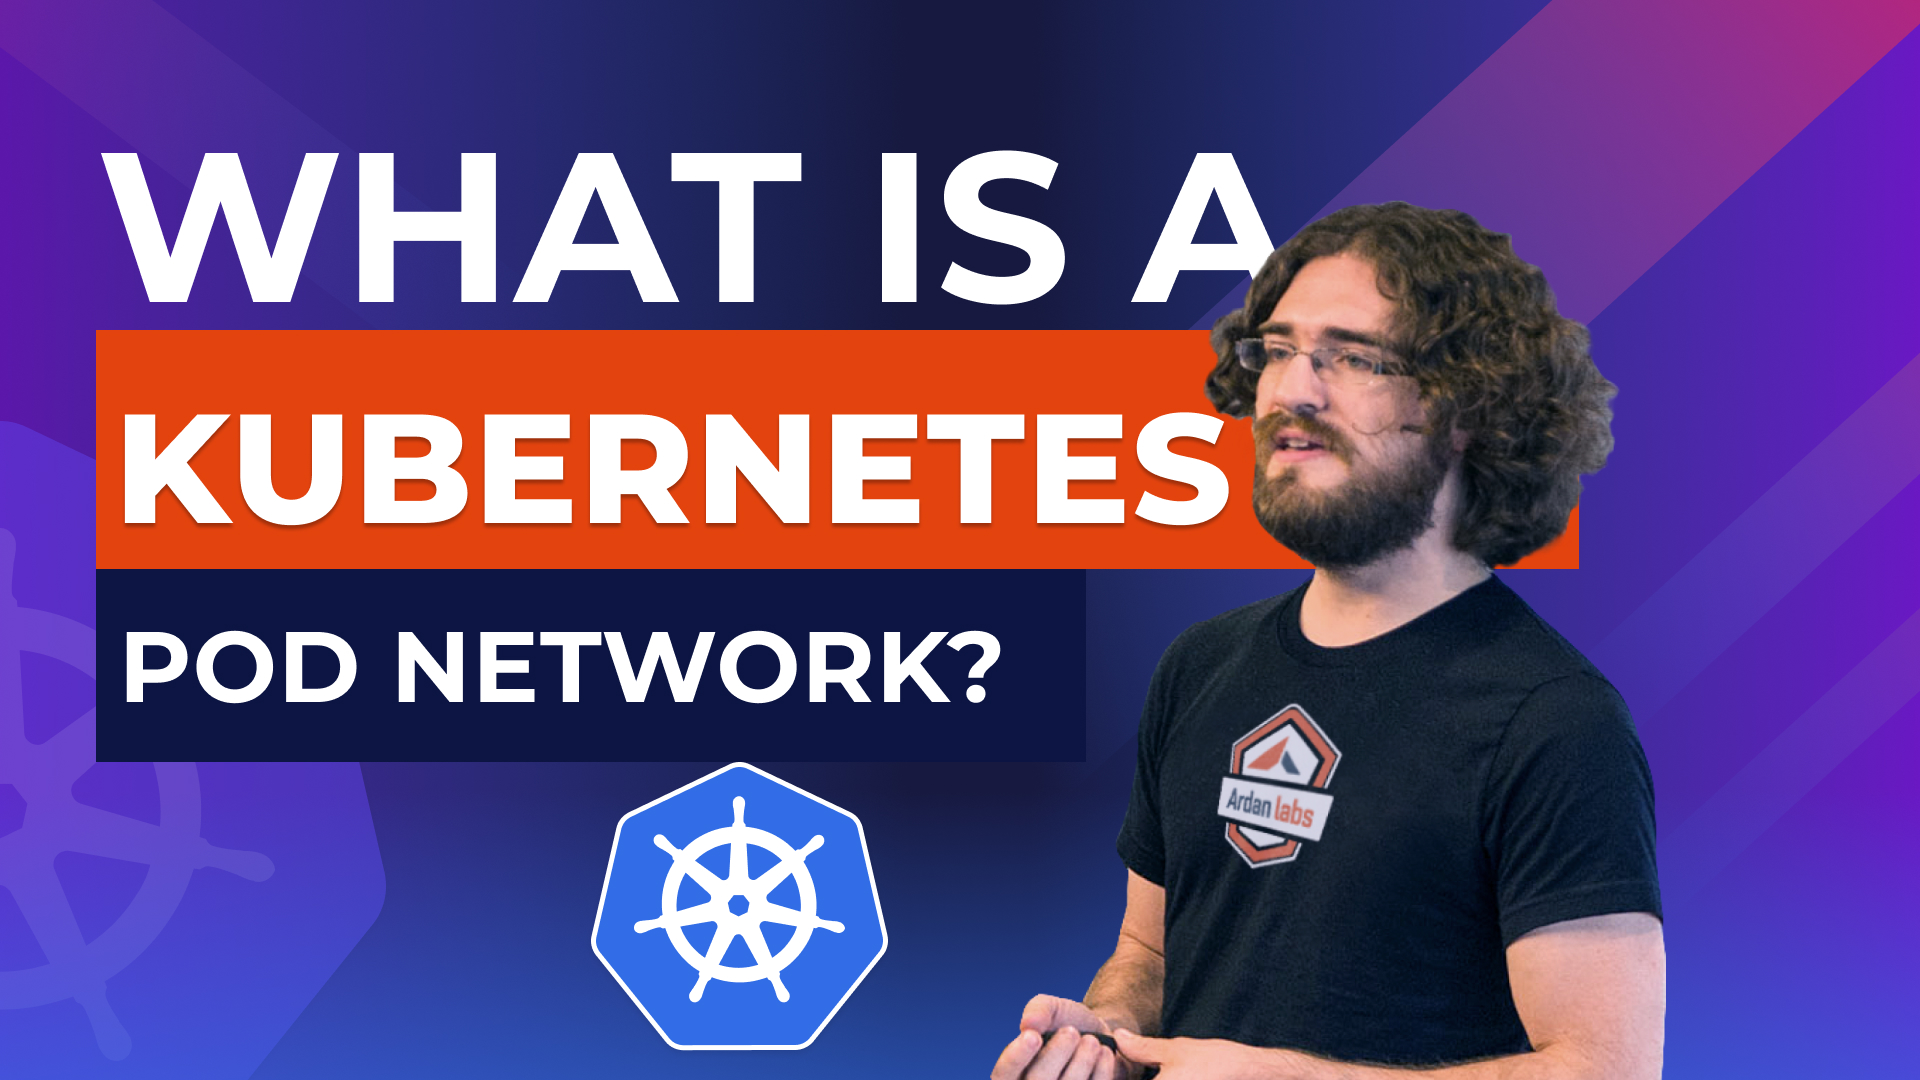 What is a Kubernetes pod network?